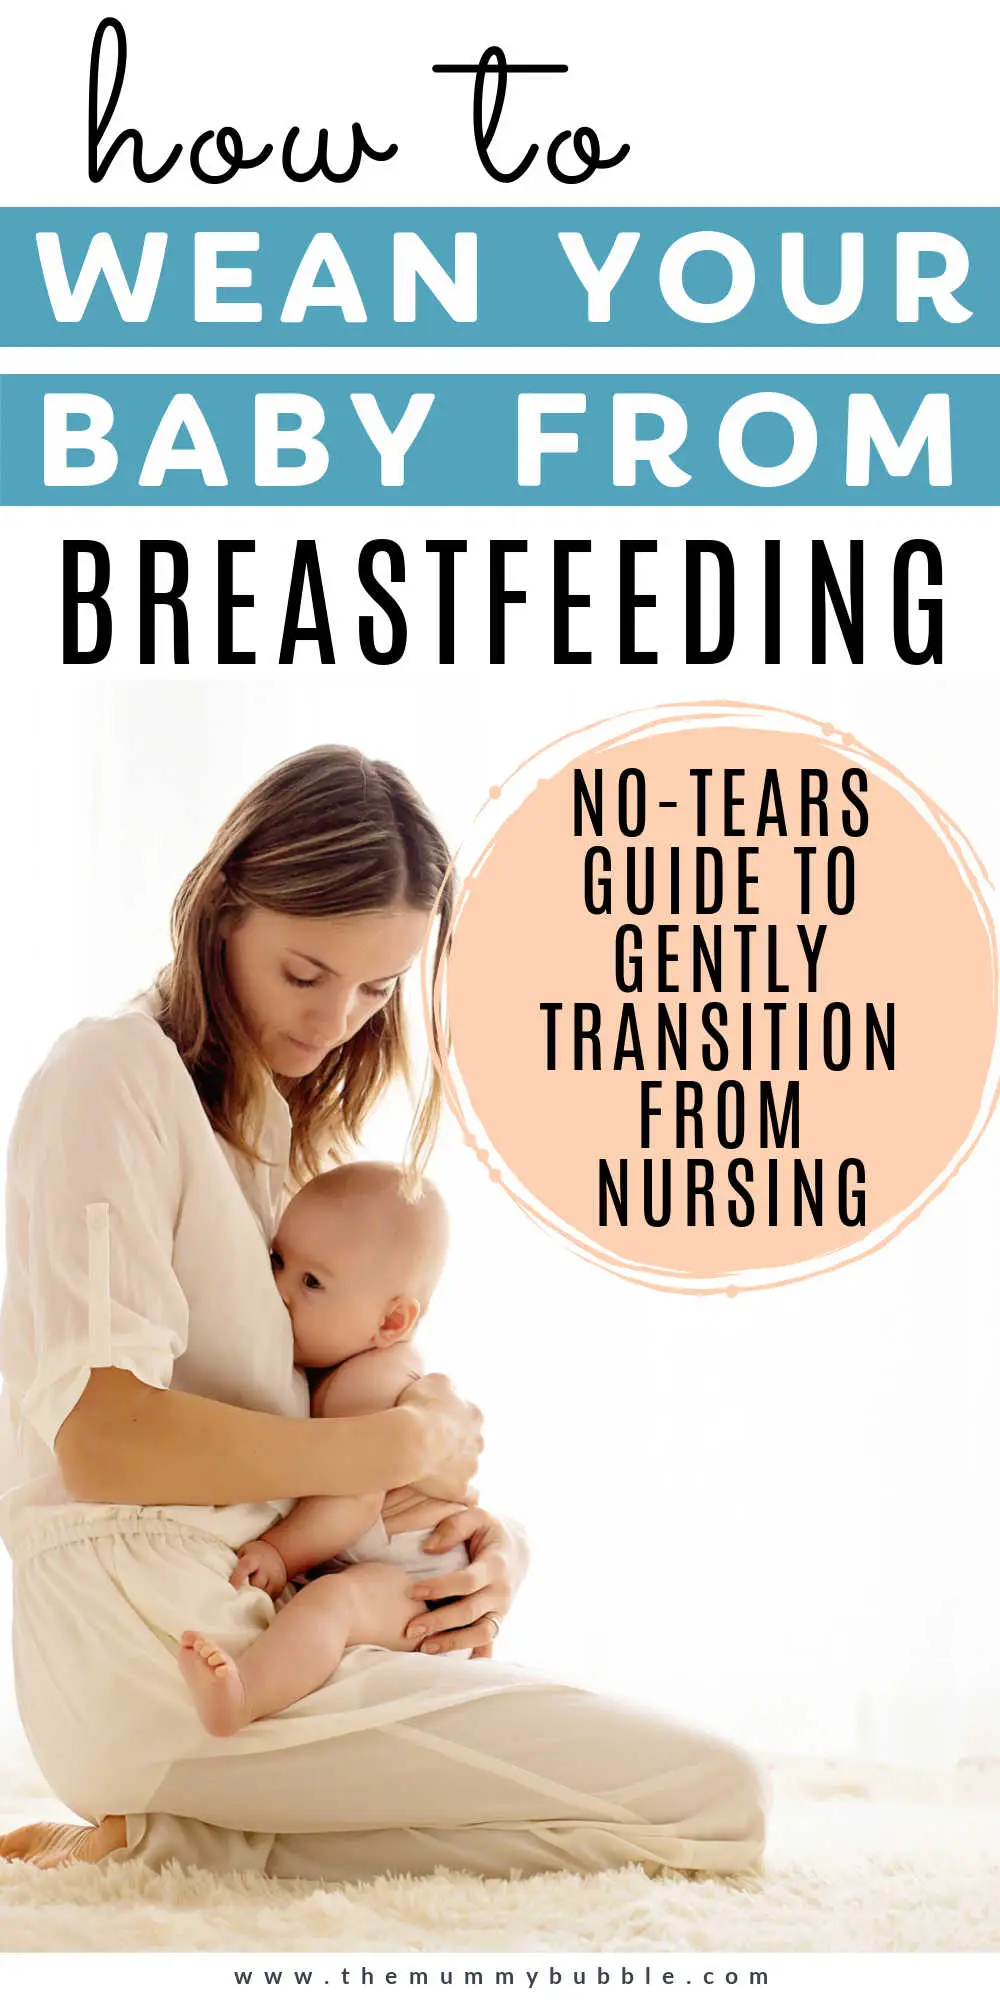 How to wean your baby from breastfeeding 